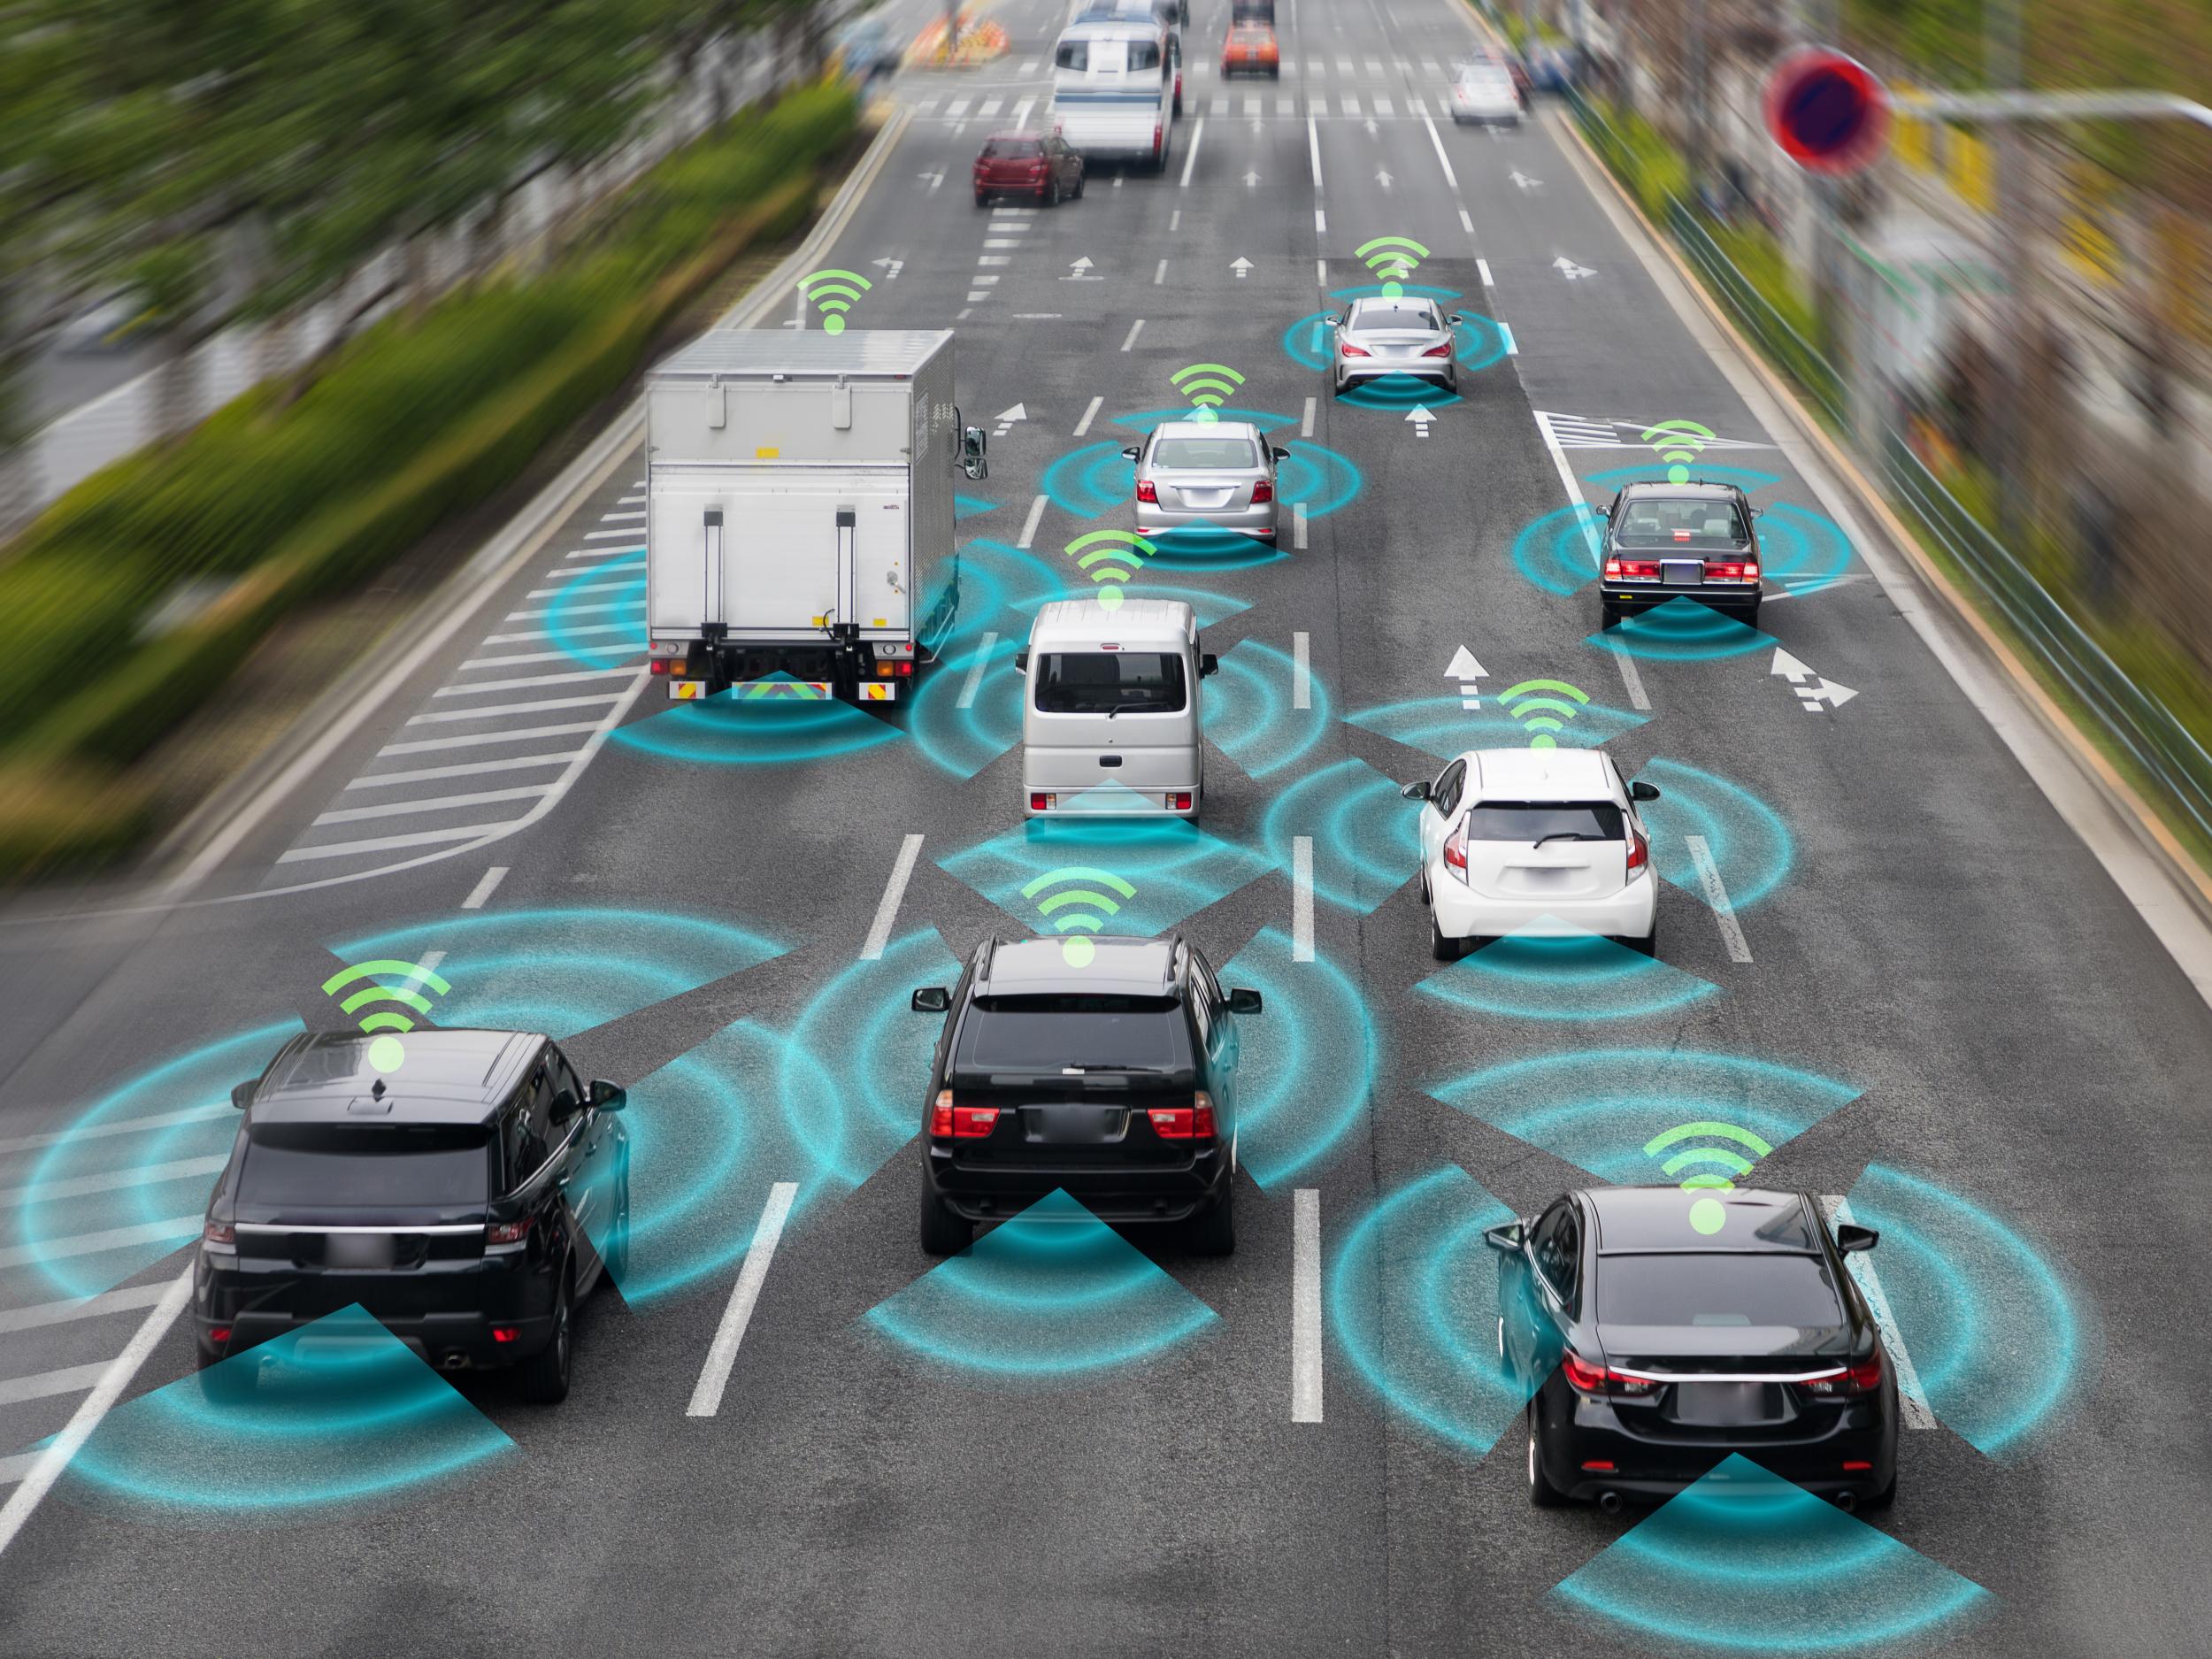 Driverless cars threaten to help enable new forms of surveillance and oppression